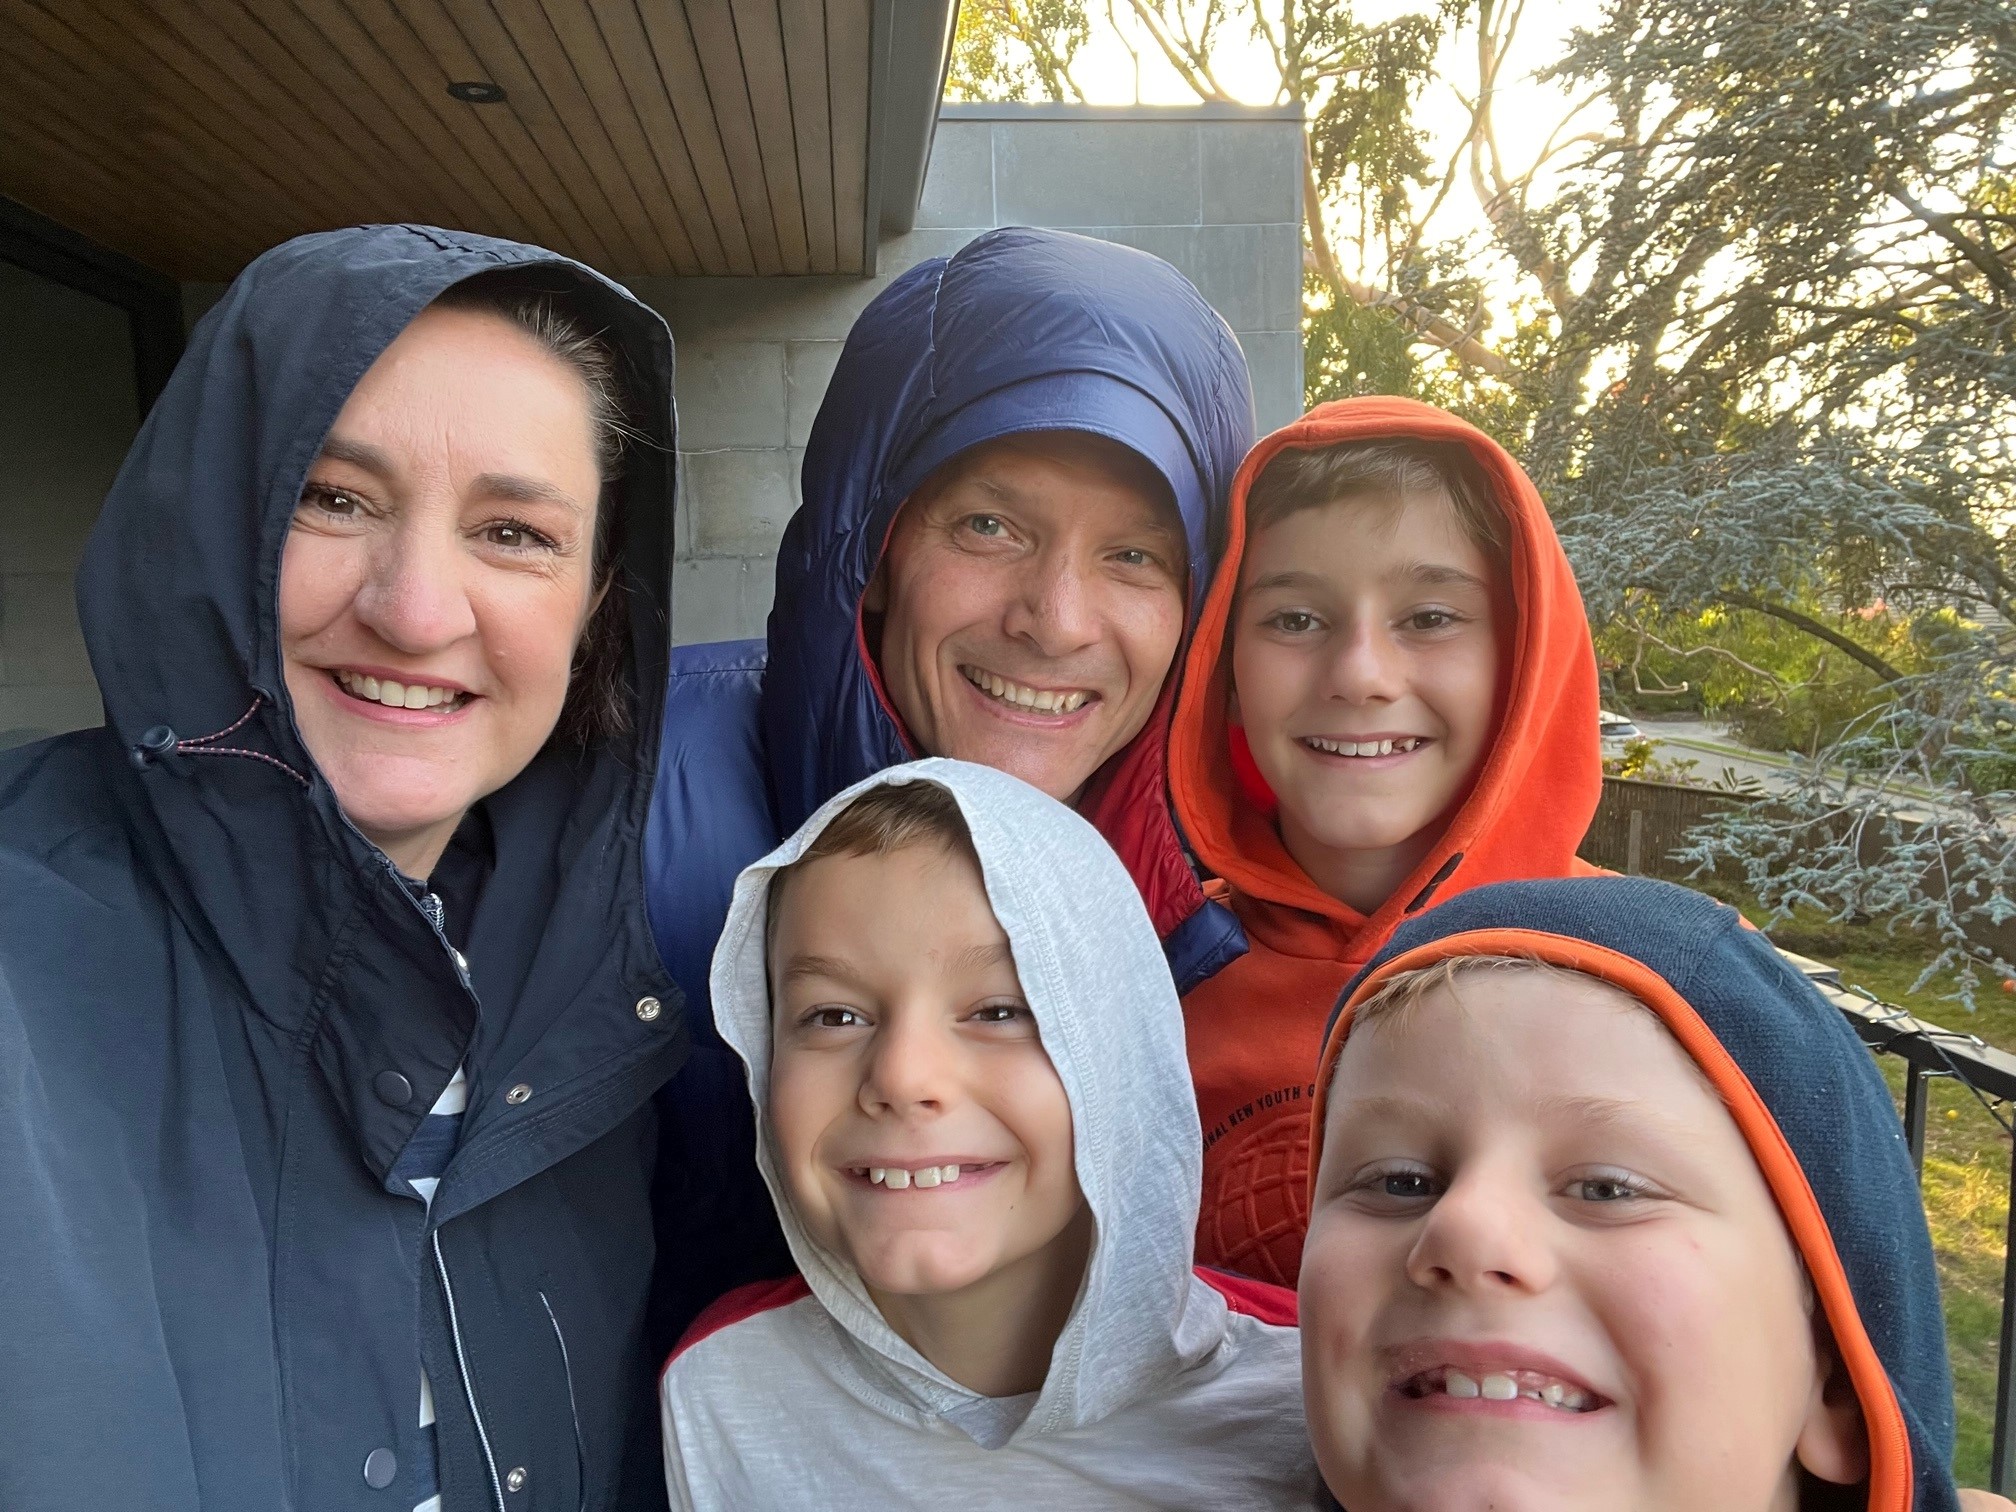 Felix and his family, smiling and wearing hoodies outside their home